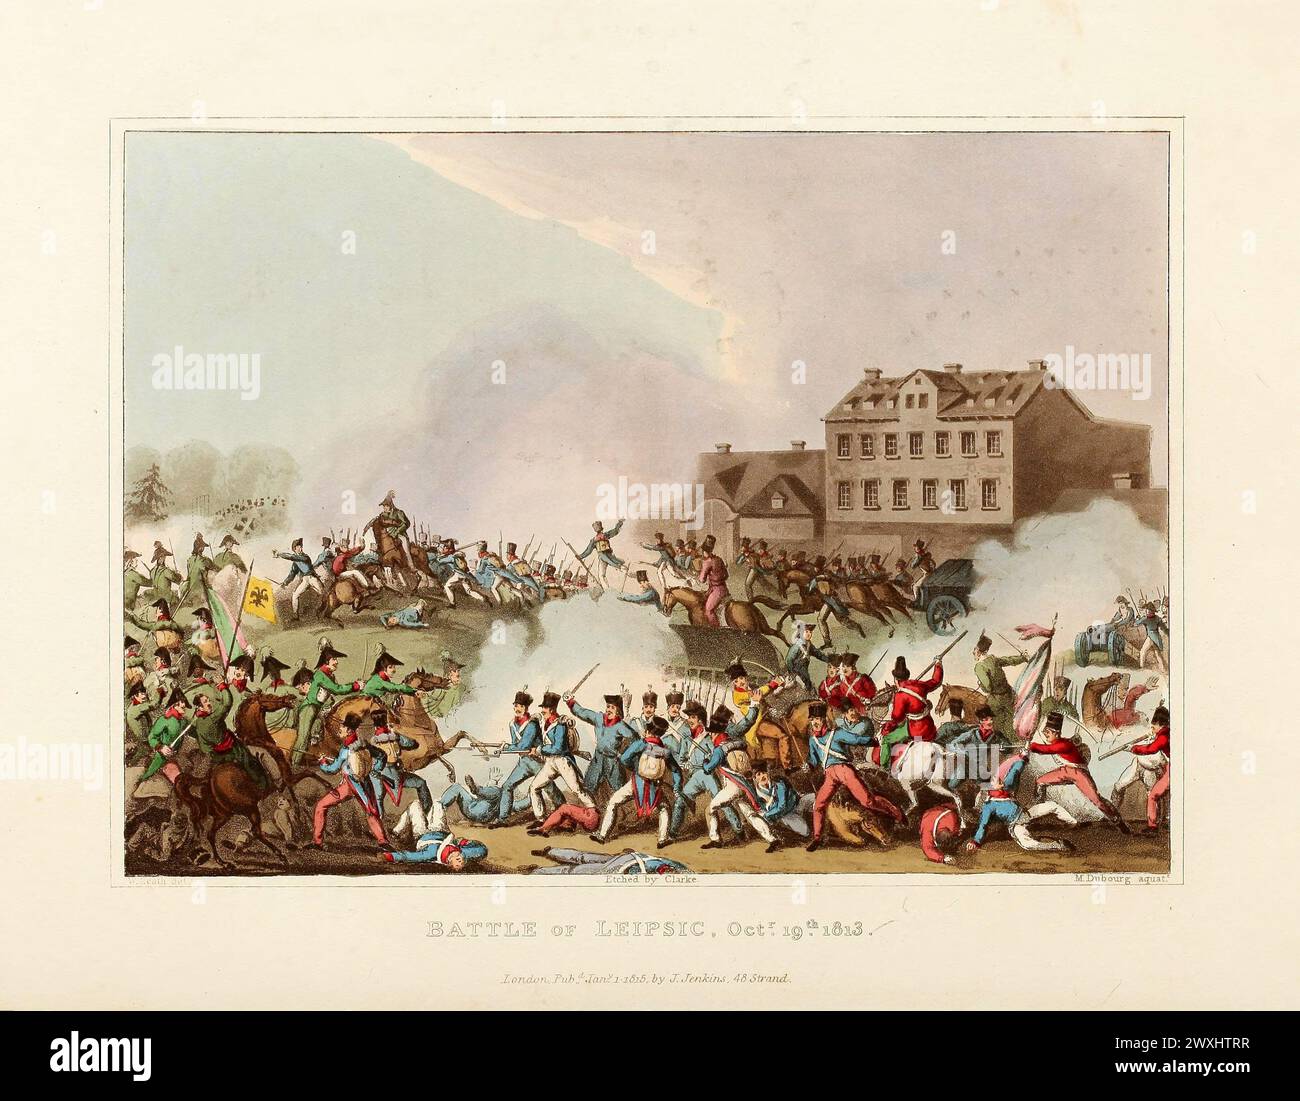 Battle of Leipsic  (now Leipzig), October 19, 1813. Vintage Coloured Aquatint, published by James Jenkins, 1815,  from  The martial achievements of Great Britain and her allies : from 1799 to 1815. Stock Photo